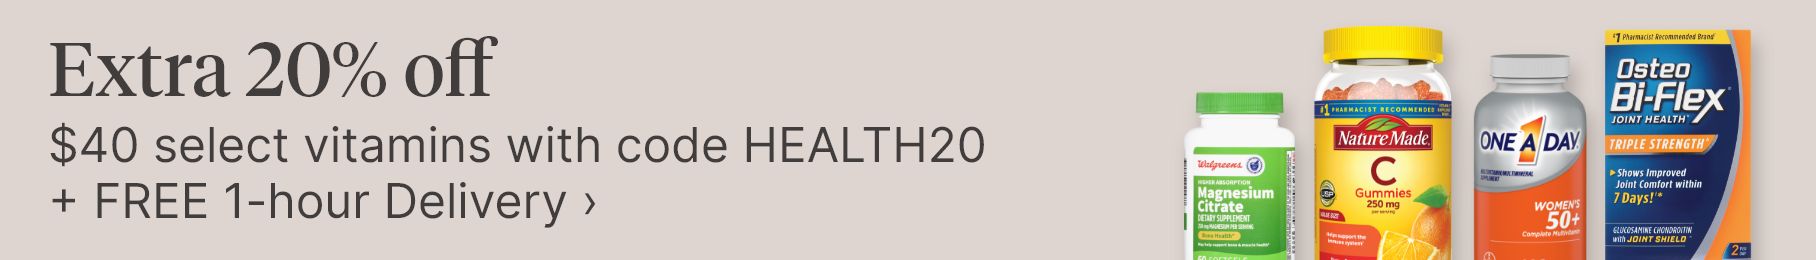 Extra 20% off $40 select vitamins with code HEALTH20 + FREE 1-hour Delivery